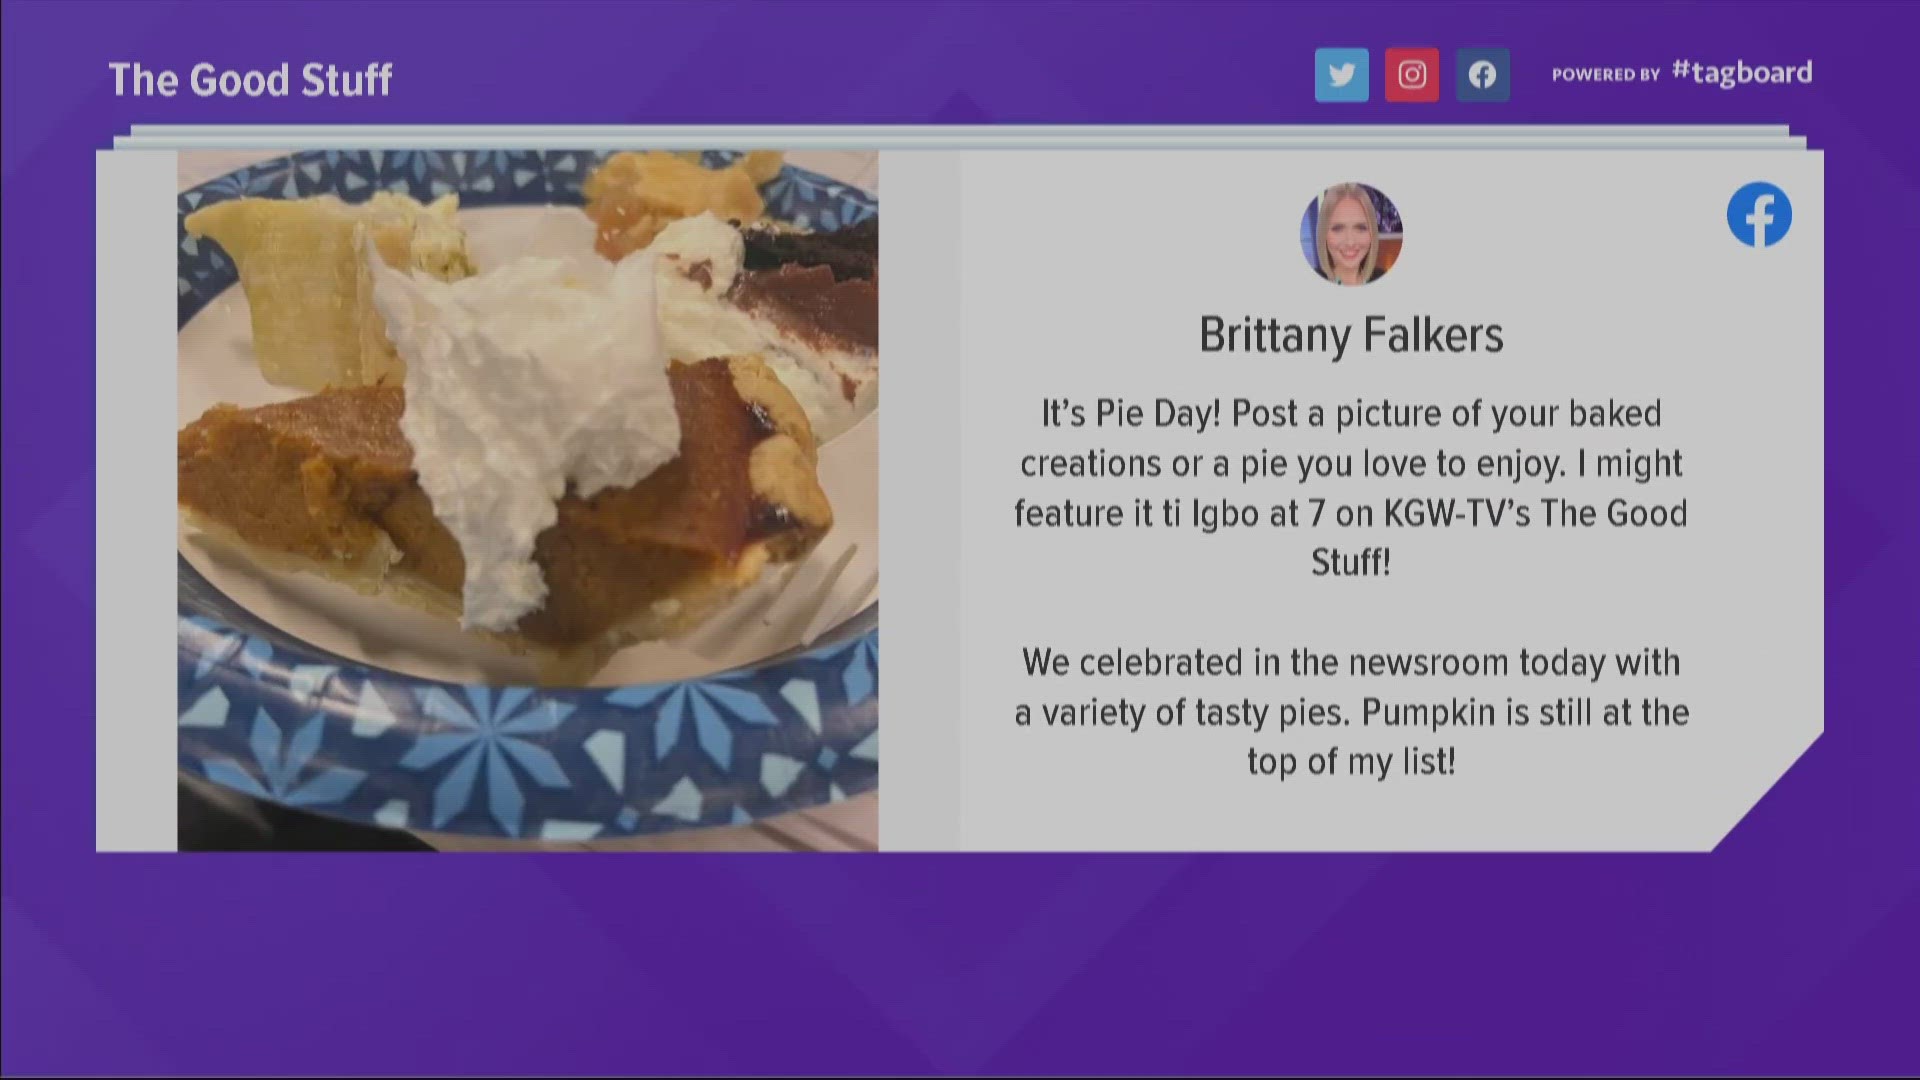 On the Good Stuff, KGW viewers submitted pictures of their pies in celebration of Pi Day.